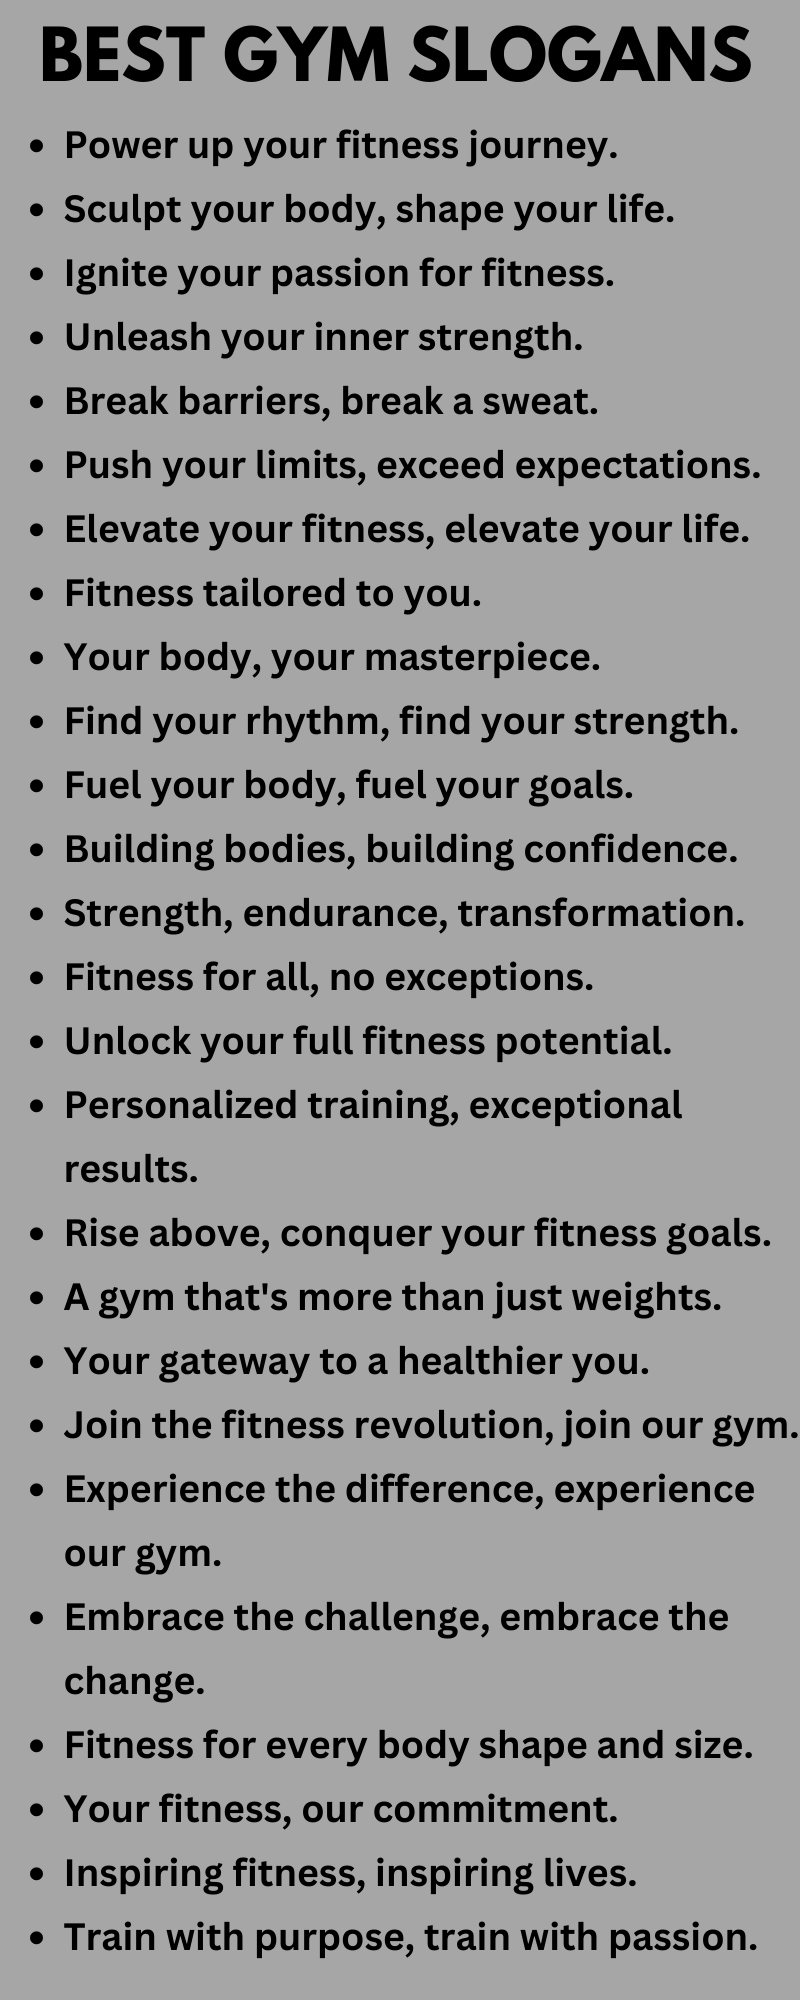 500 Gym Slogans For Your Fitness Business